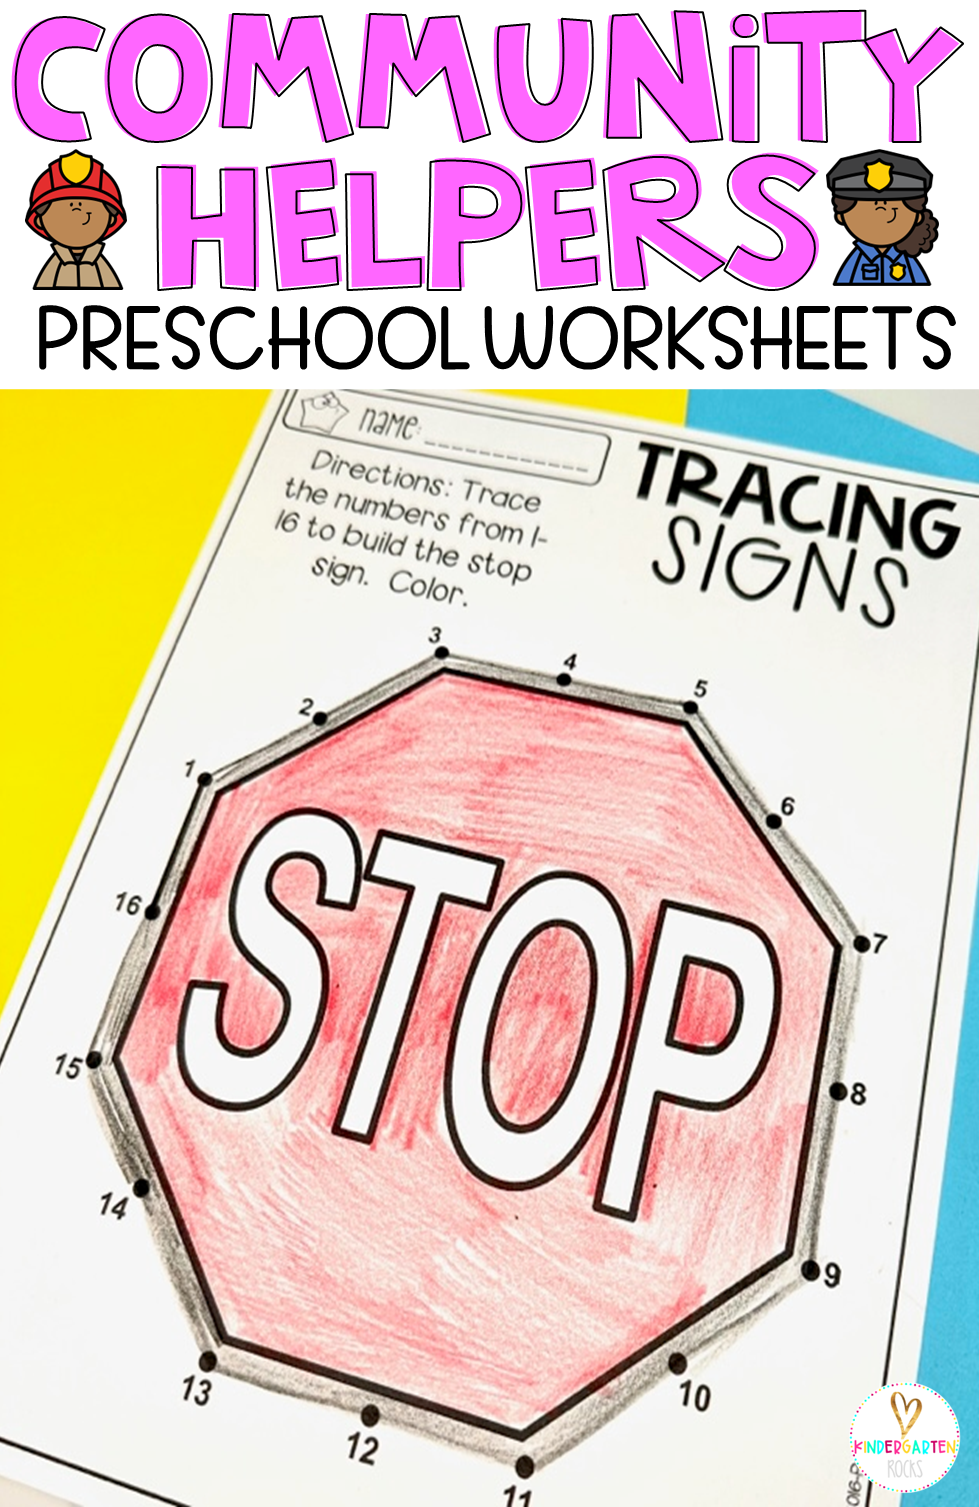 Are you looking for fun community helpers math and literacy centers, morning bin activities and printables that you can prep quickly for your preschool classroom? Then you will love Community Helpers Math and Literacy Prntables for Preschool. 